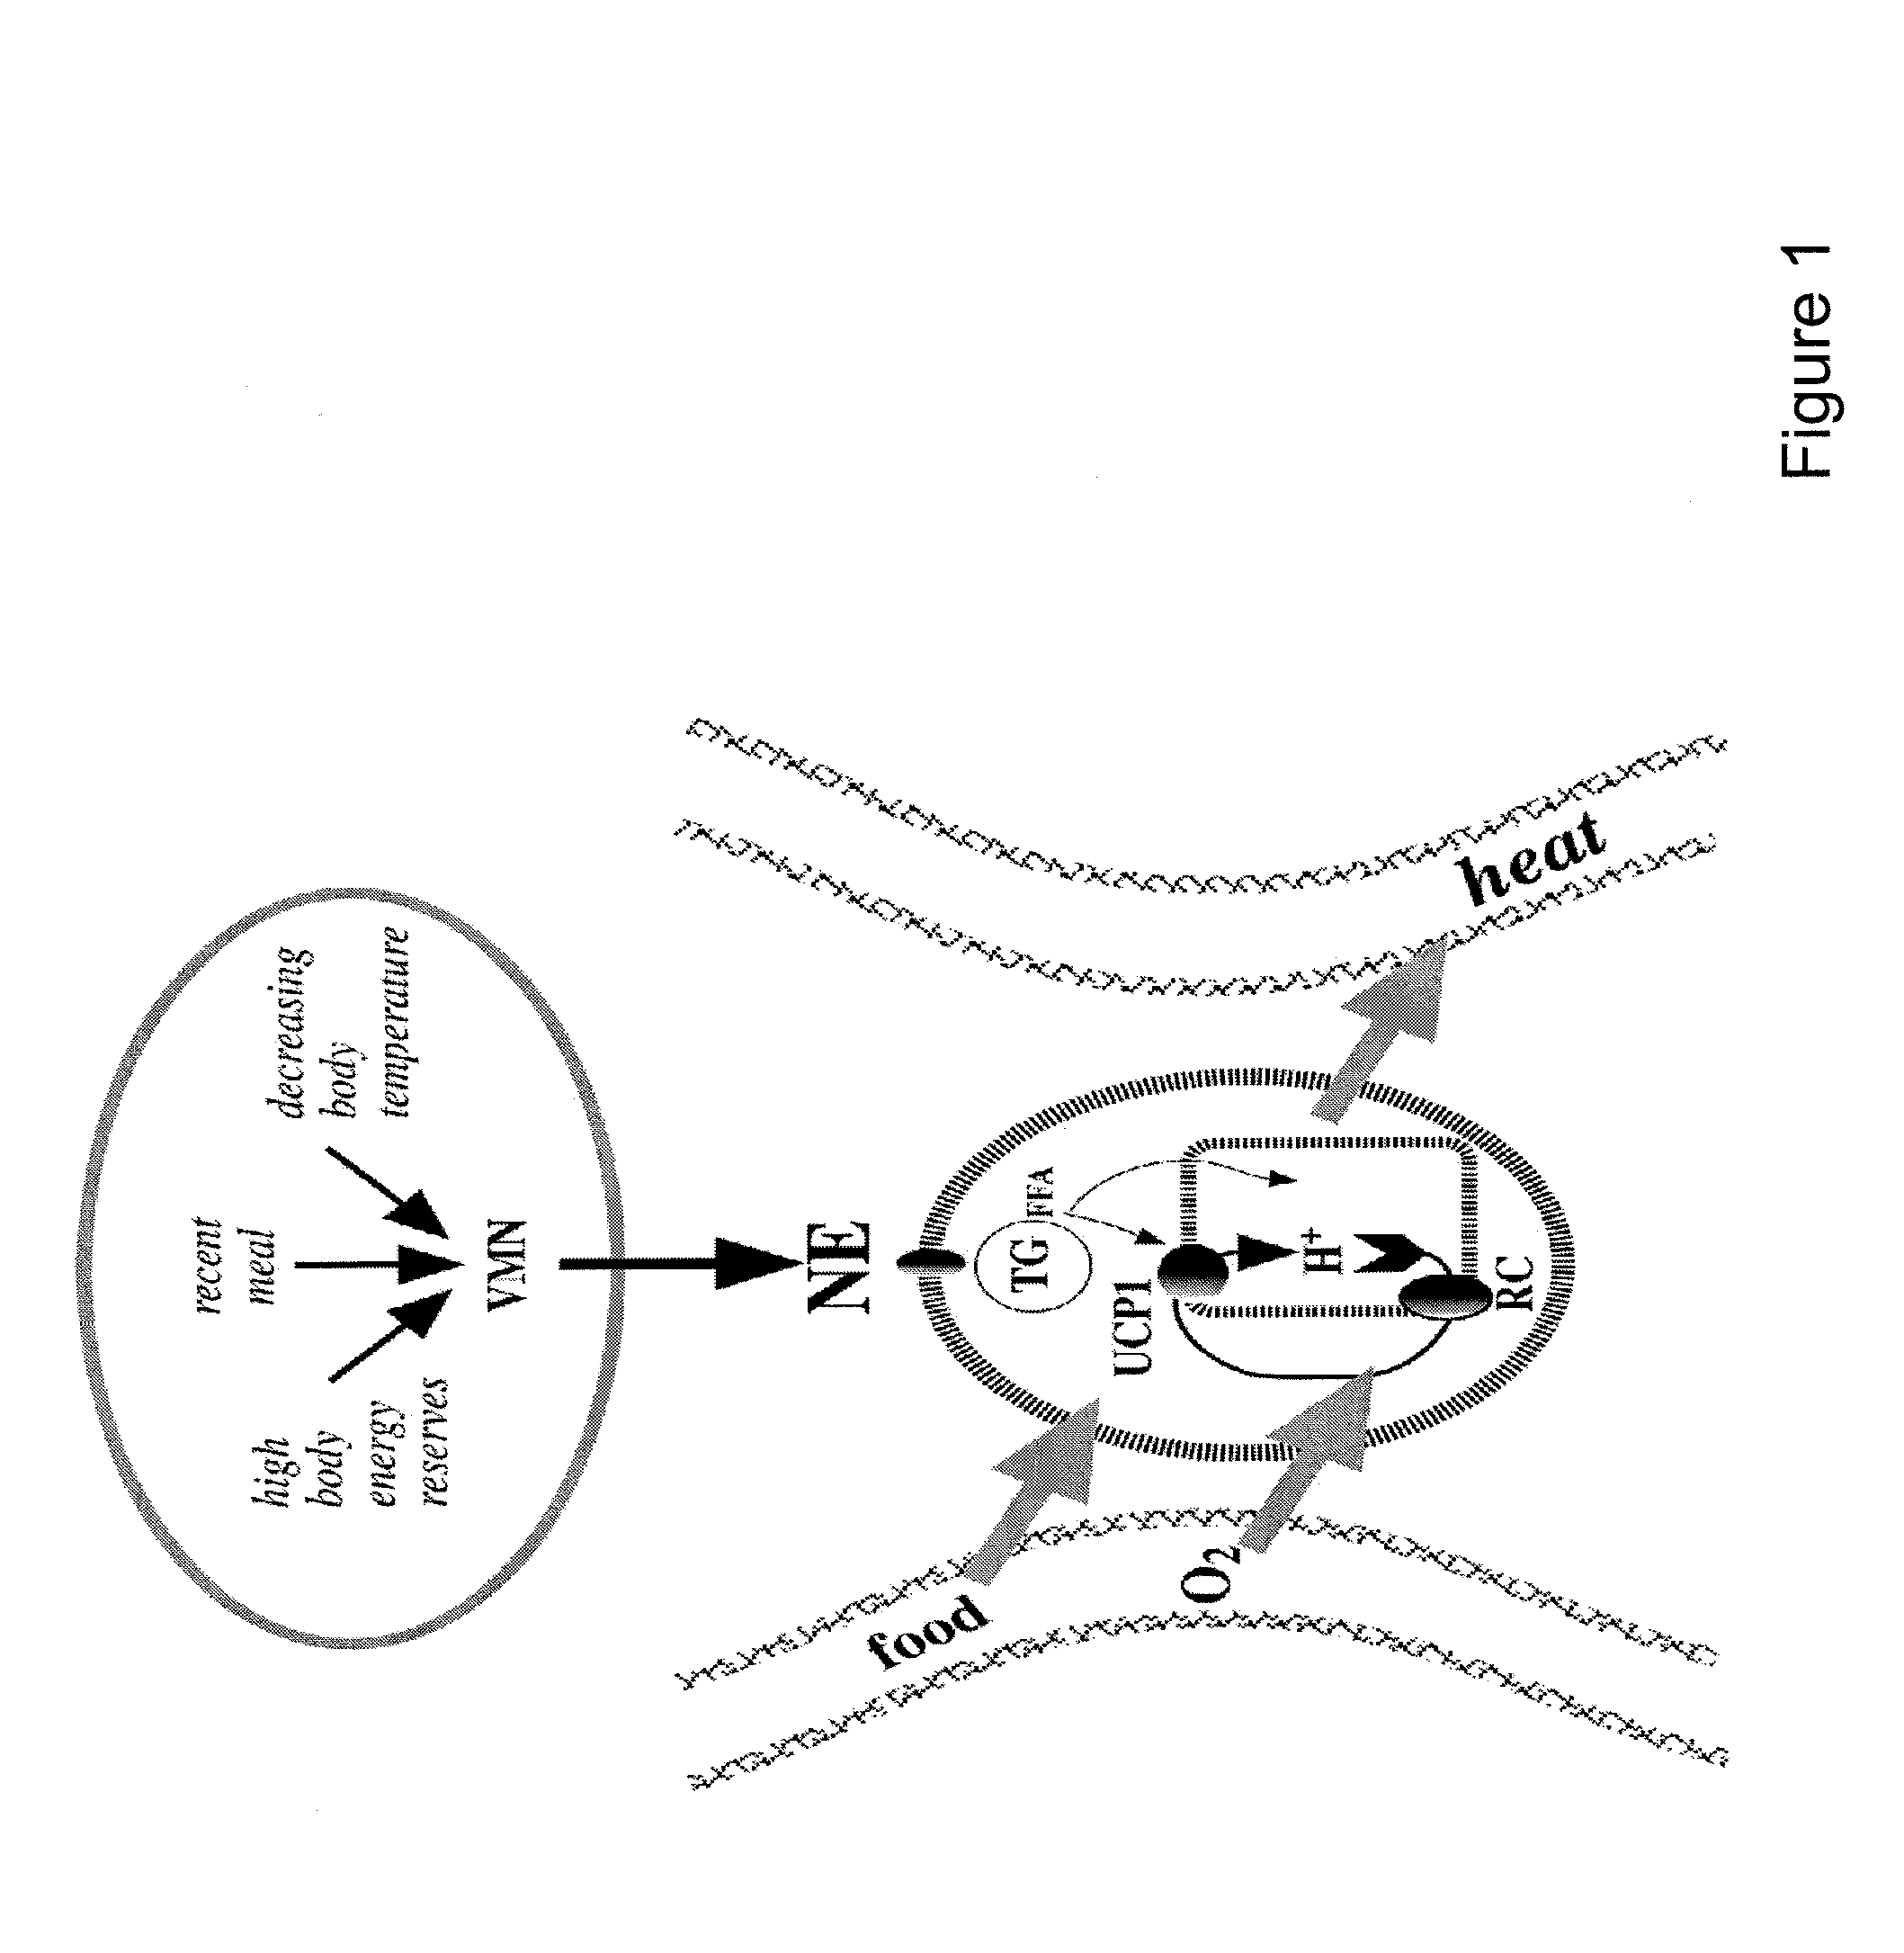 Diagnostic Methods and Combination Therapies Involving MC4R